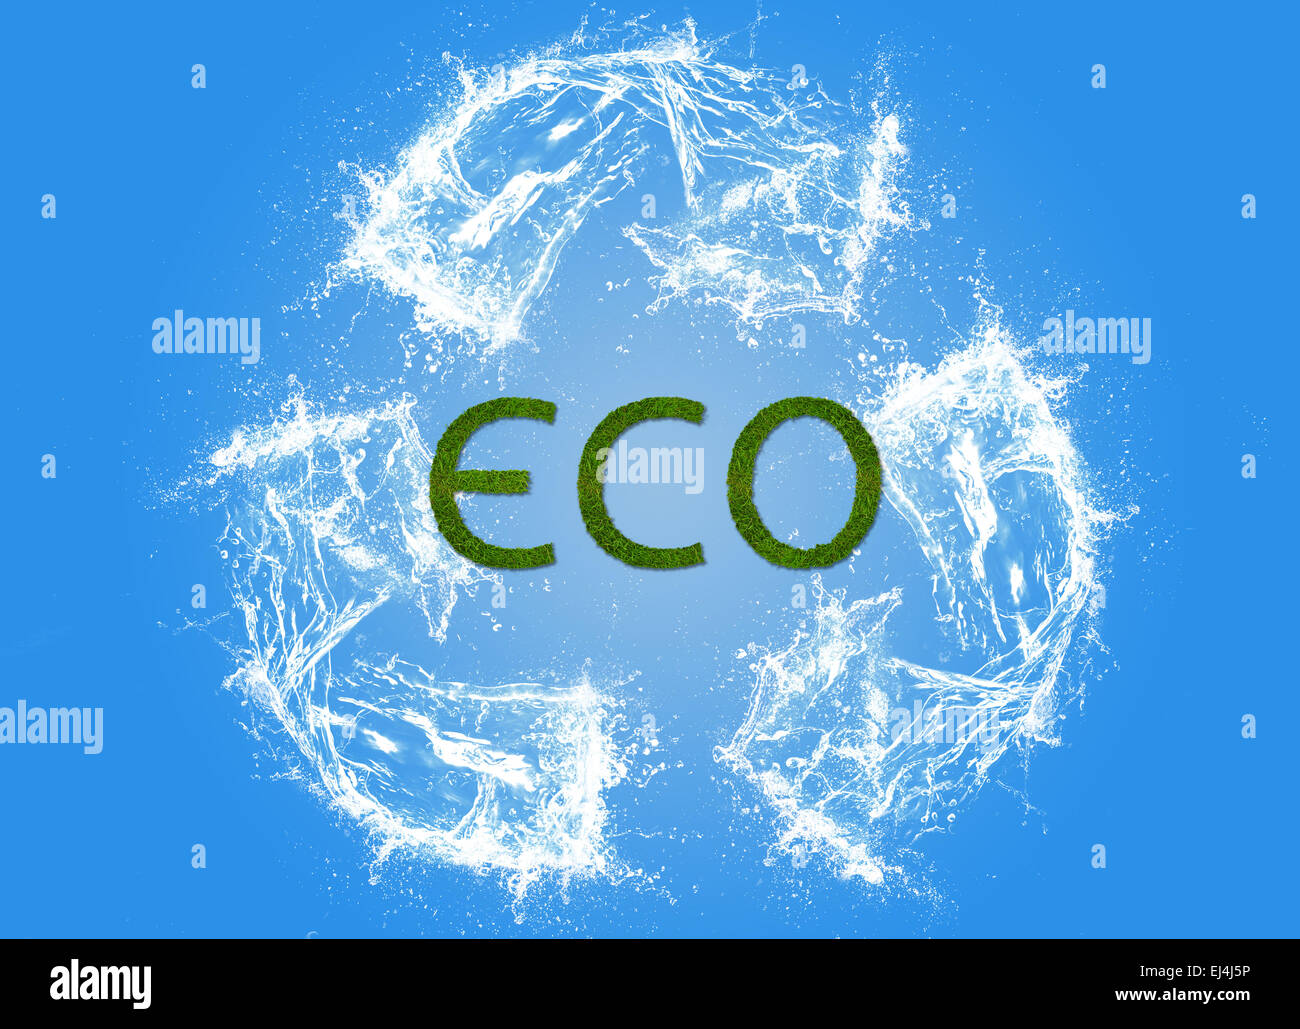 eco sign, pollution, ecological, eco friendly, digital art Stock Photo